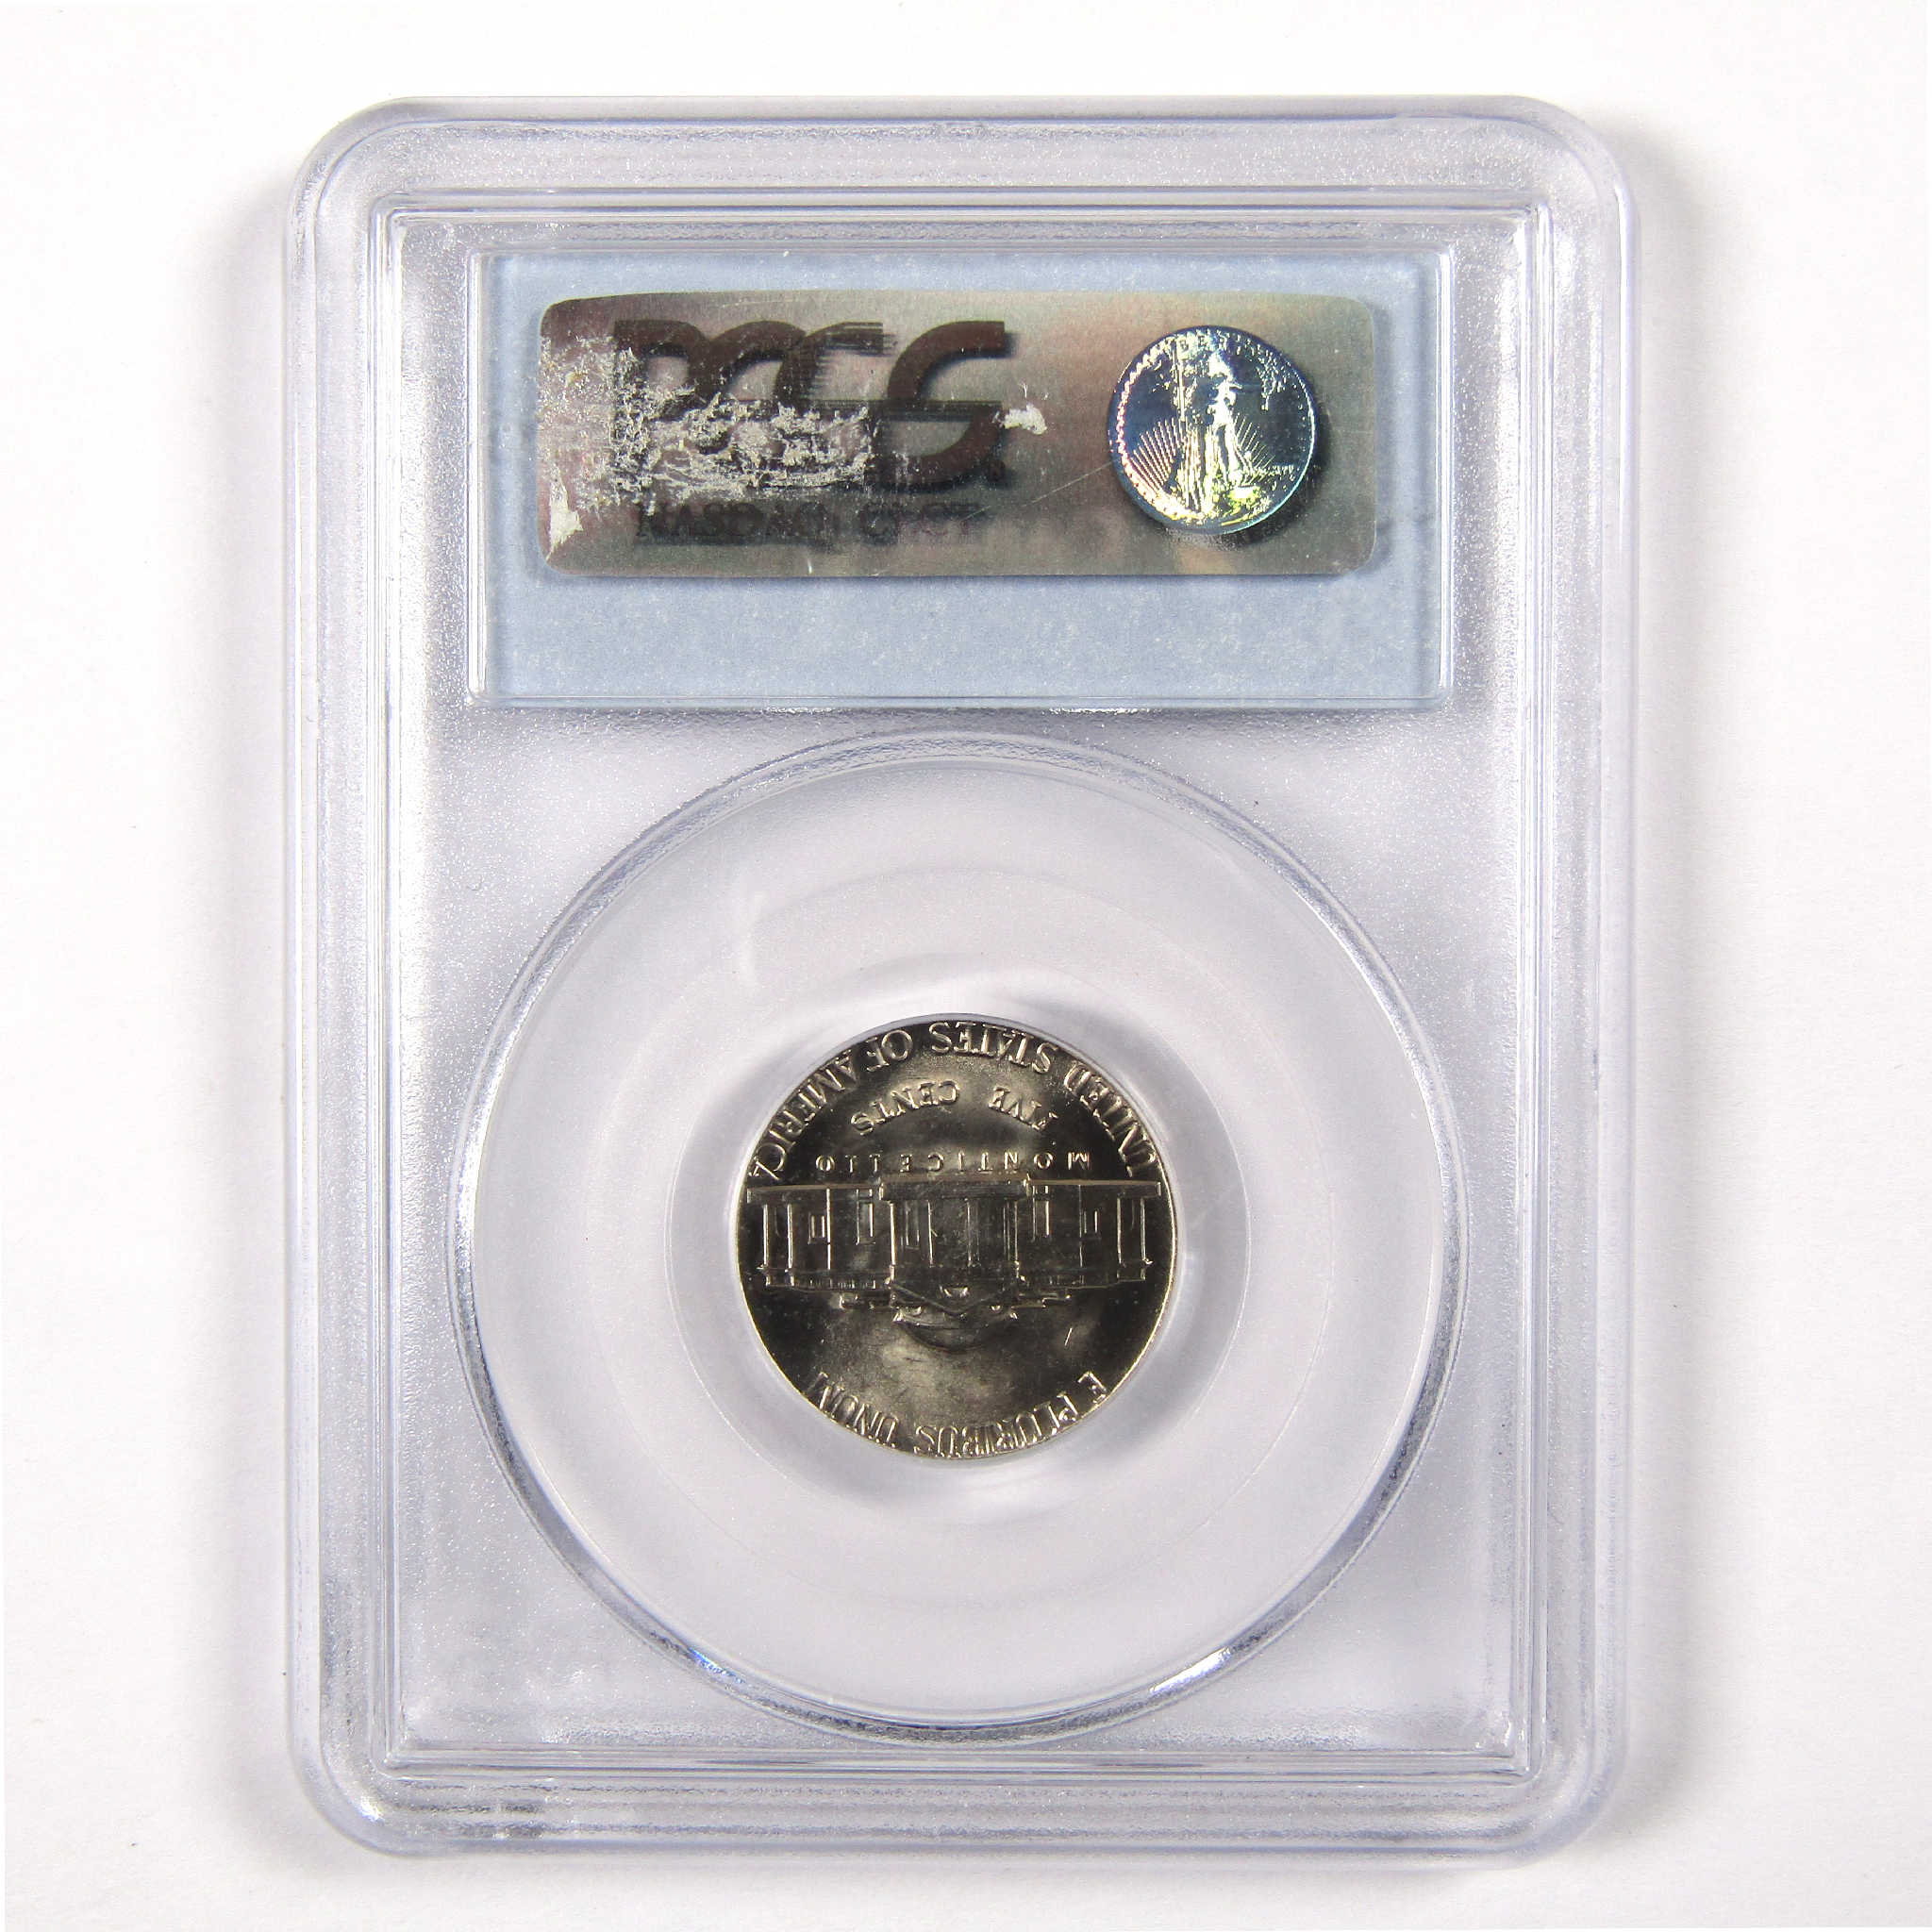 1975 D Jefferson Nickel MS 66 PCGS 5c Uncirculated Coin SKU:CPC5467